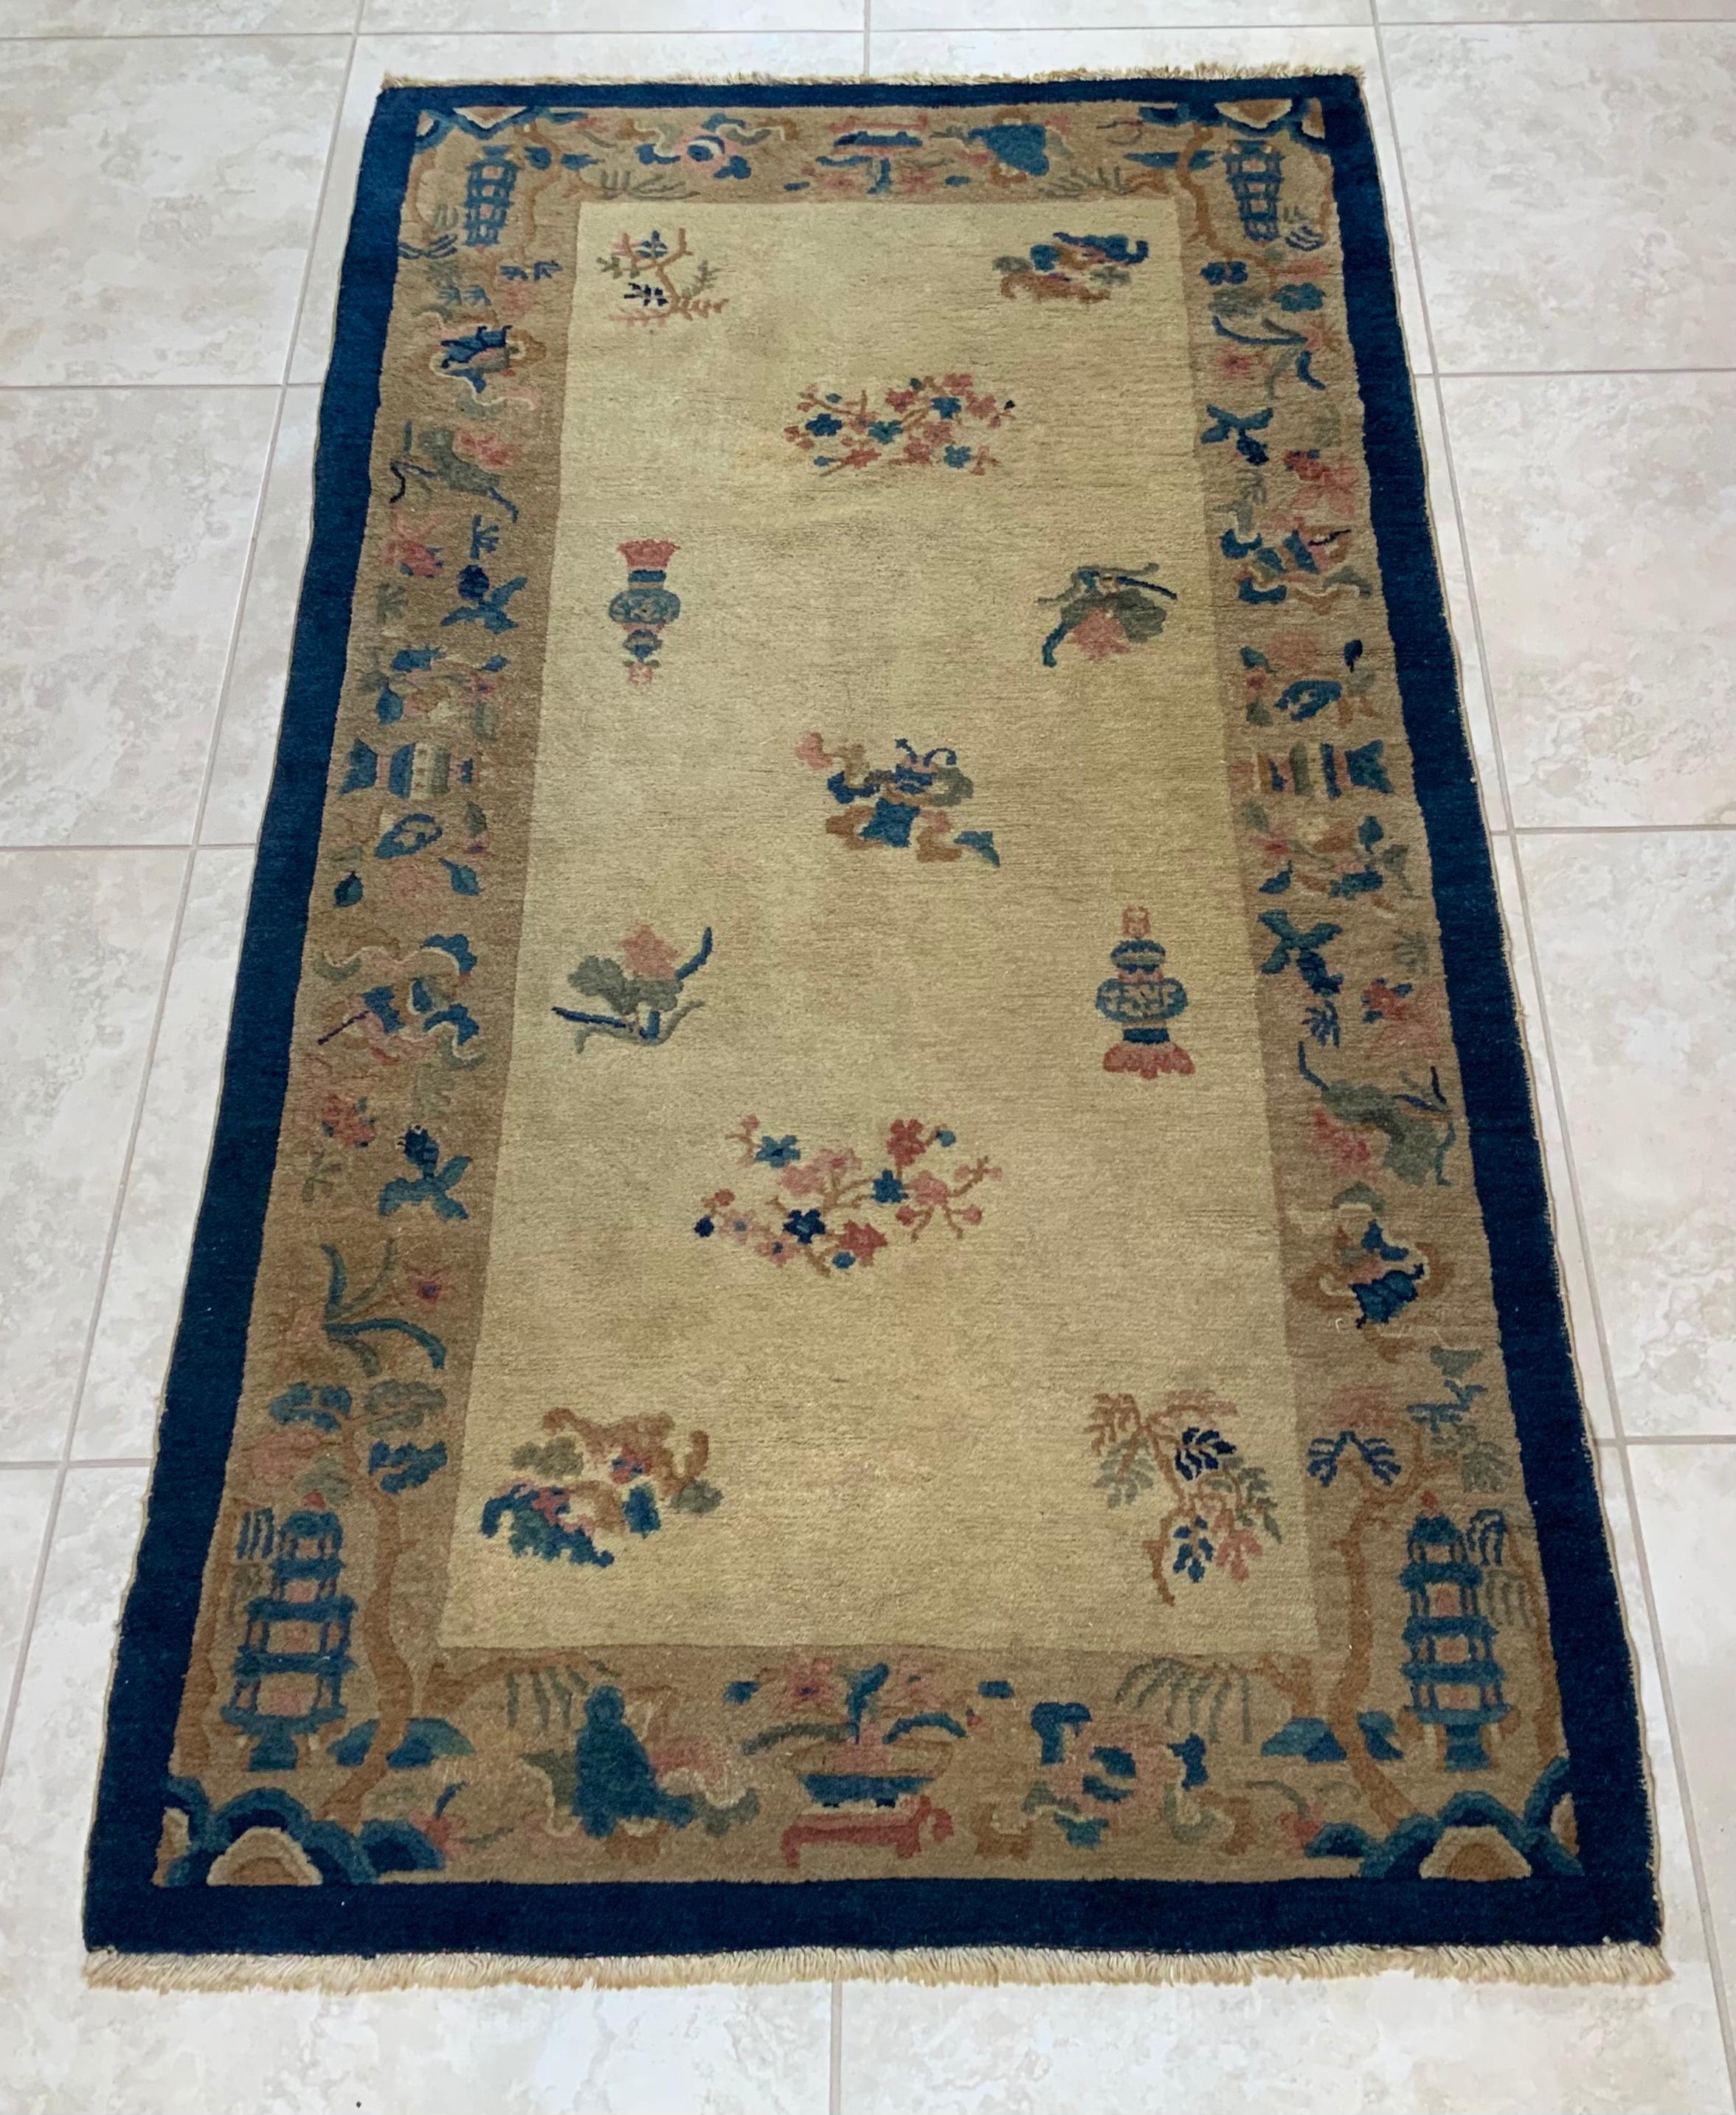 Beautiful handwoven rug made of wool with Chinese motifs all-over, fine weave
Professionally cleaned before the sale, could use as floor runner, great decorative rug for the floor.